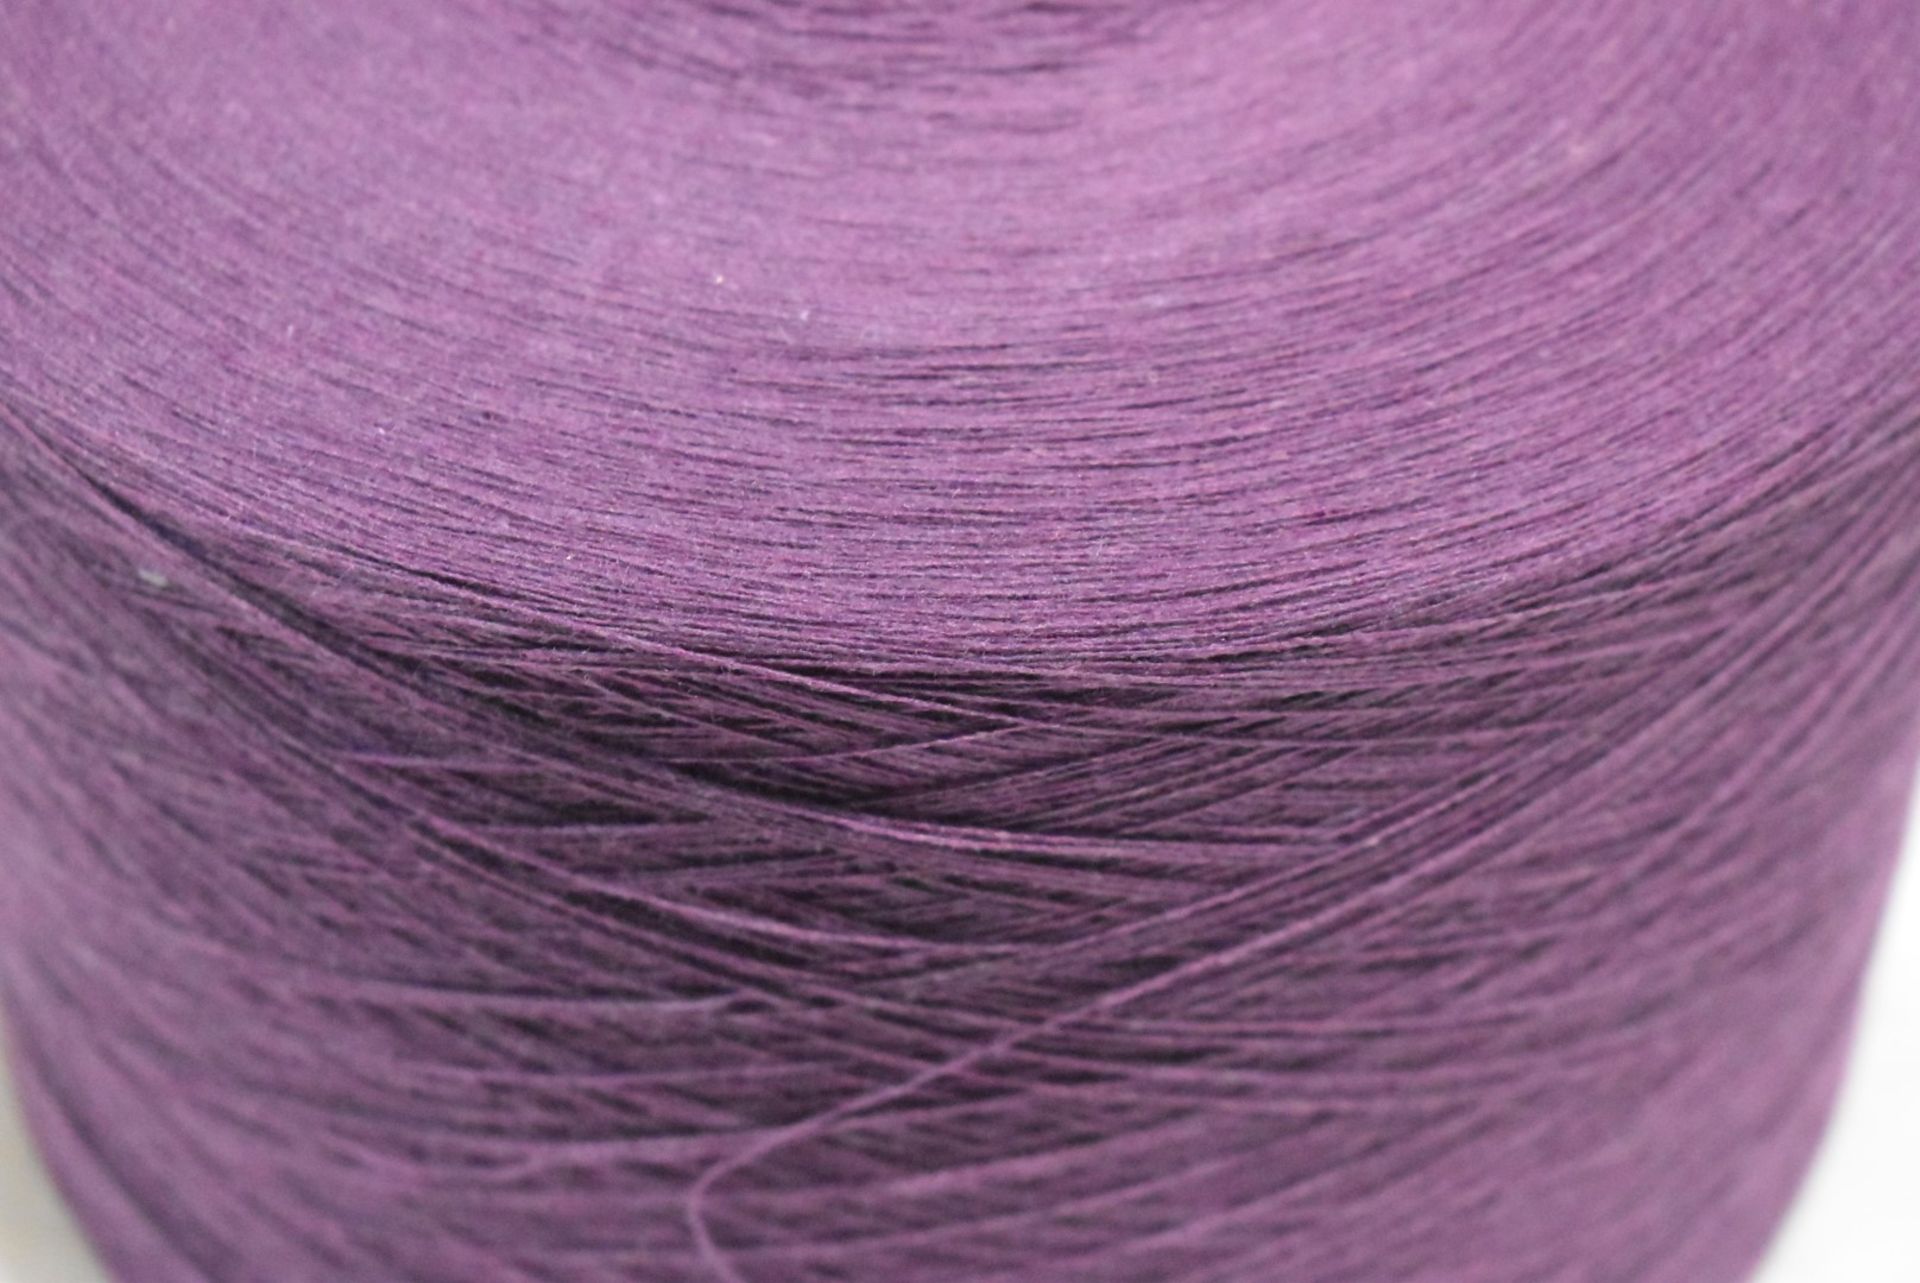 6 x Cones of 1/13 MicroCotton Knitting Yarn - Colour: Purple - Approx Weight: 2,300g - New Stock - Image 3 of 9